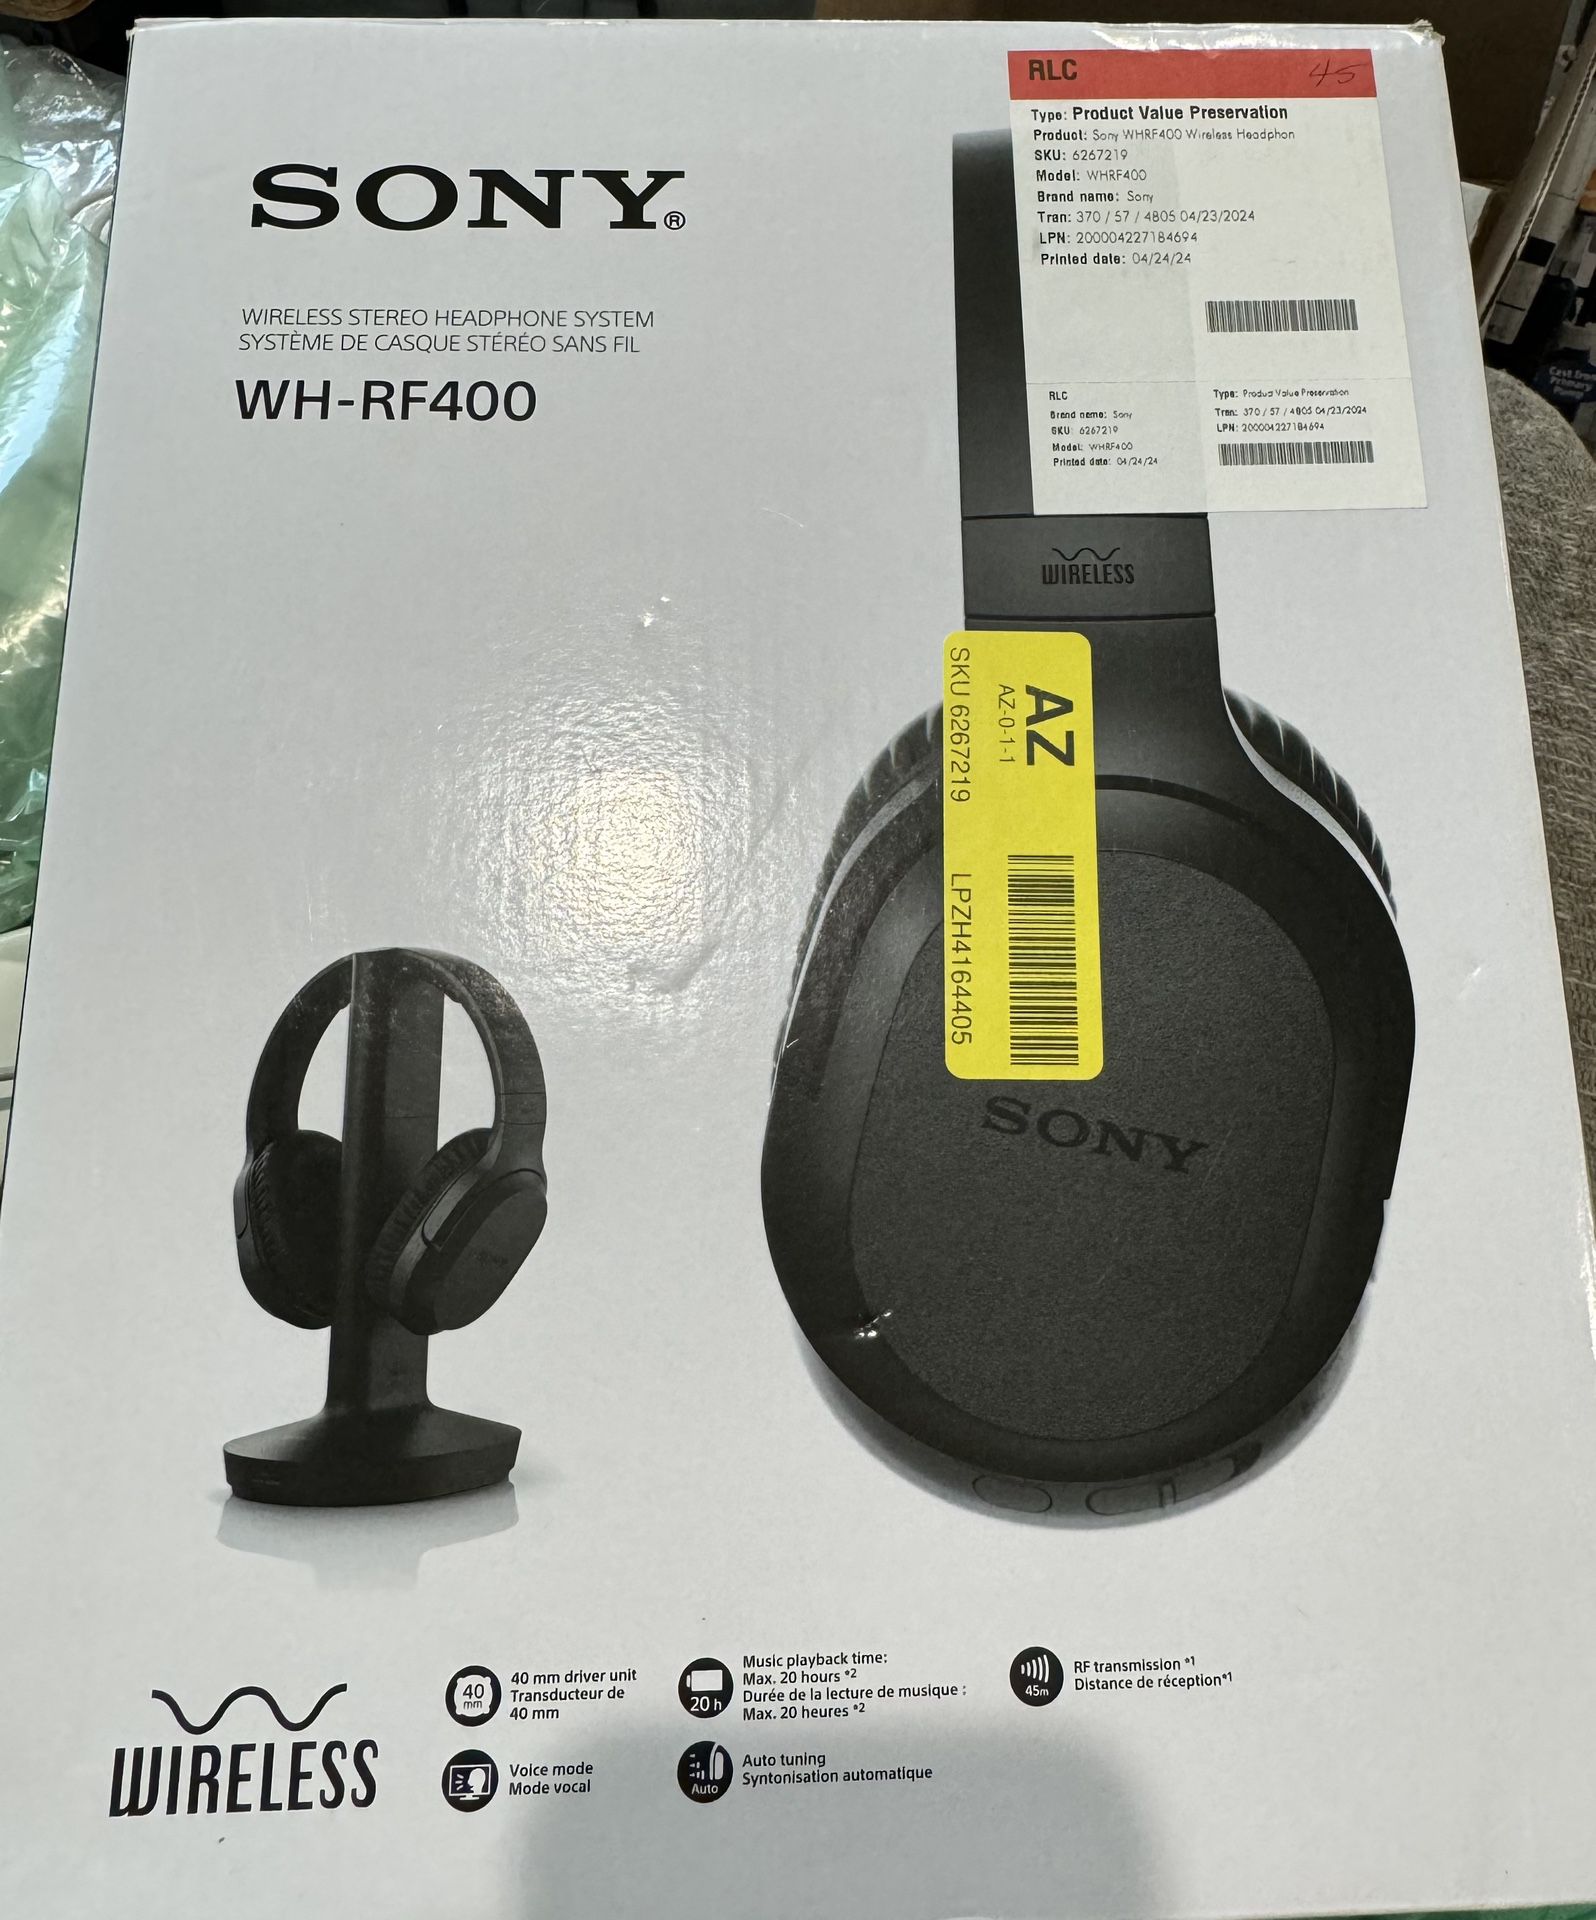 SONY Wireless Stereo Headphone System WH-RF400 TV Home Theater Gaming PC Black